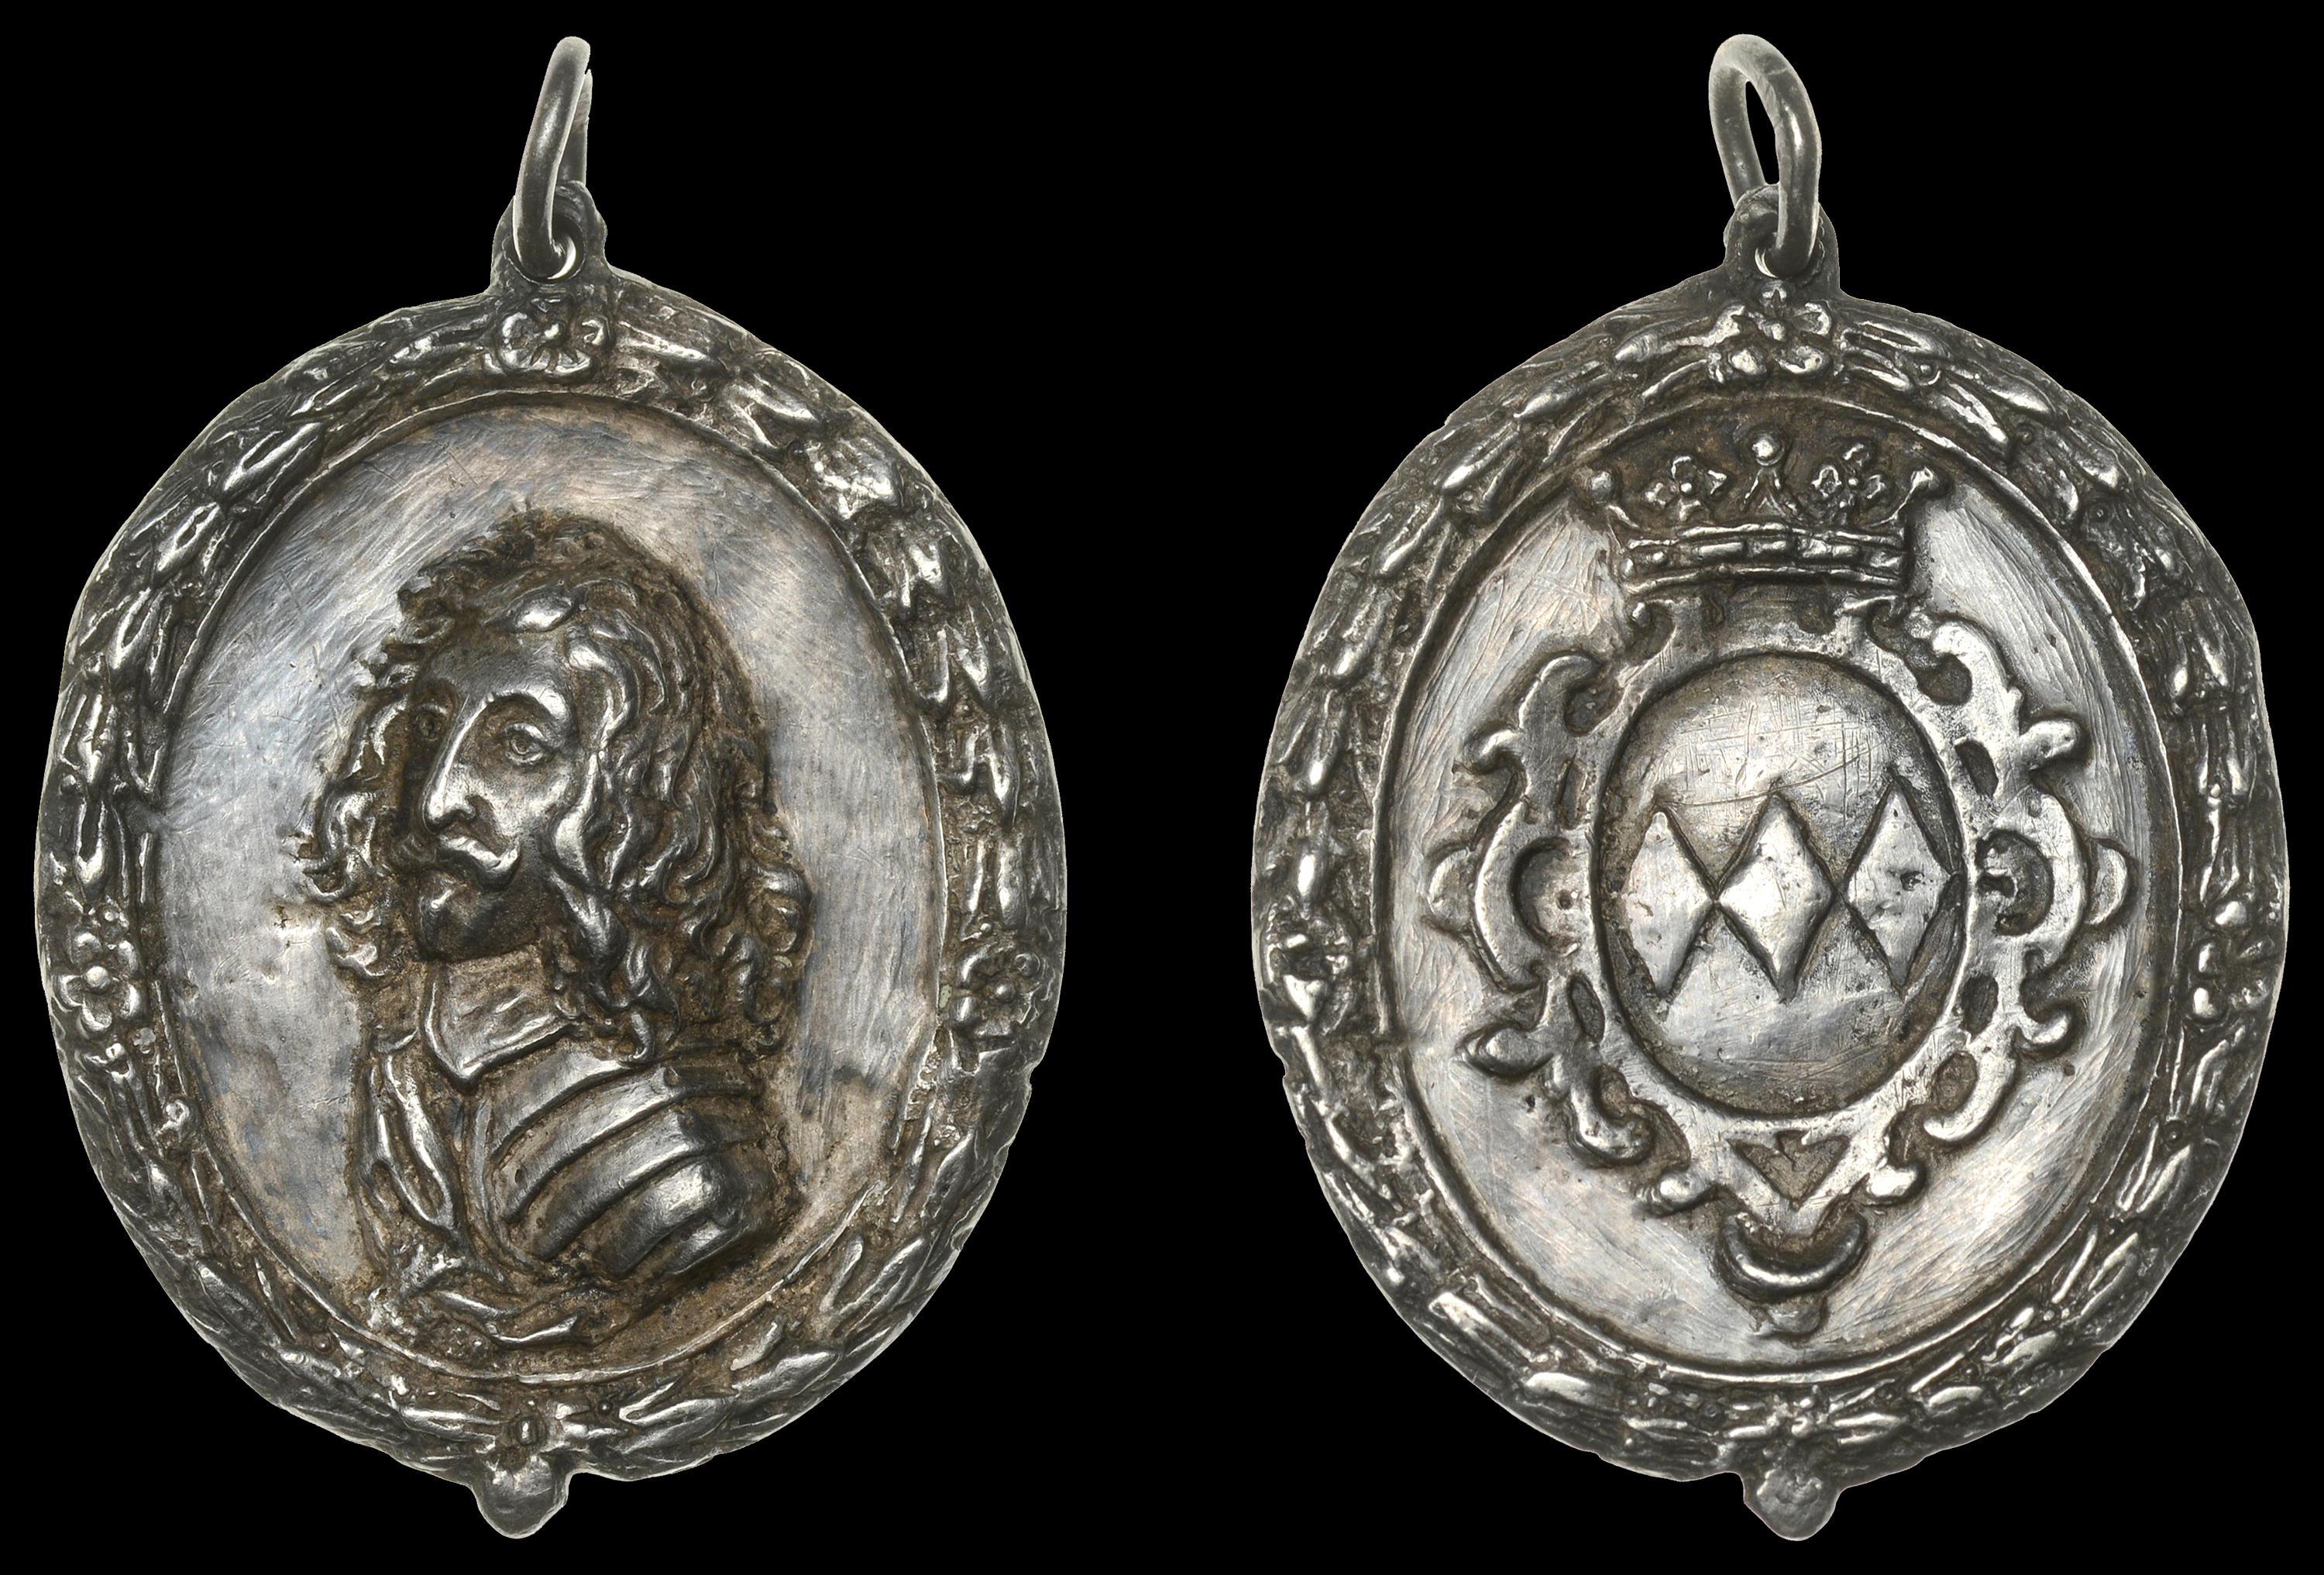 II: Civil War Medals, Edward Montagu, 2nd Earl of Manchester, 1643, a cast and chased silver